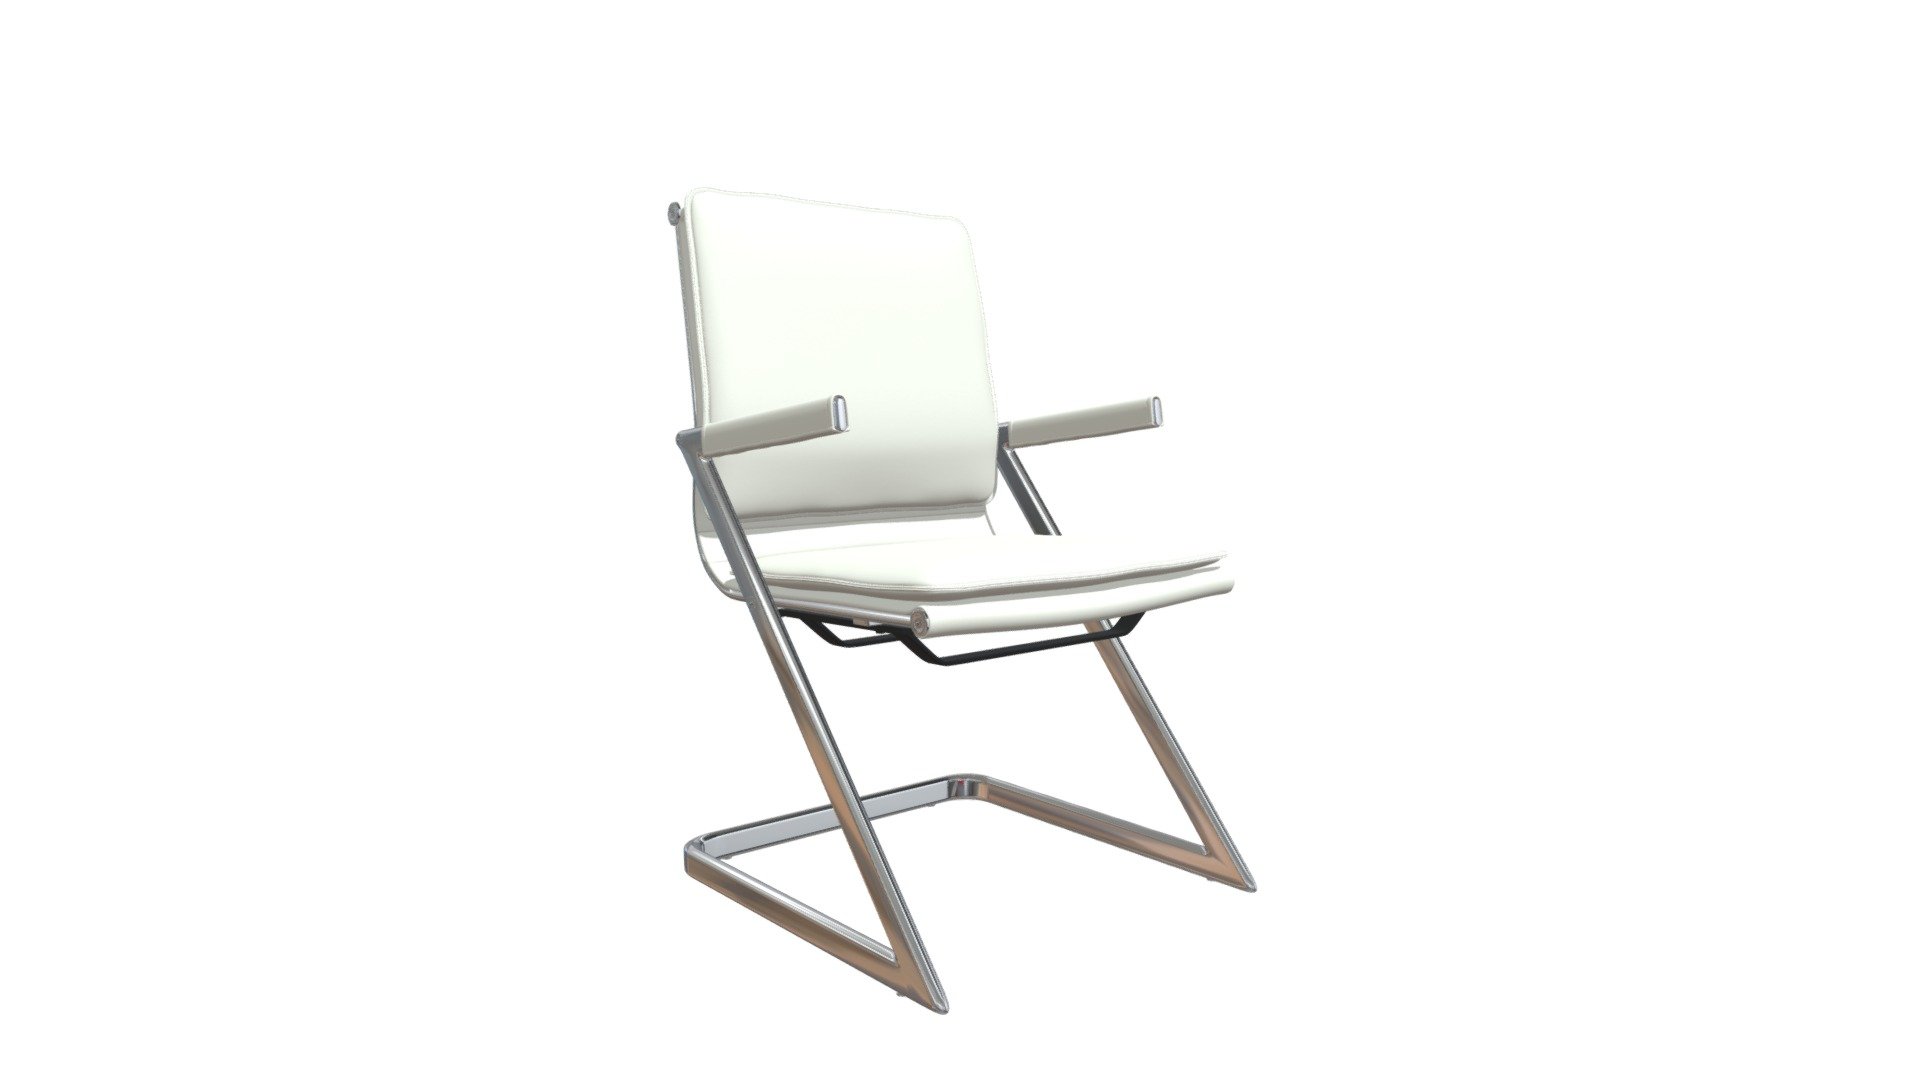 https://www.zuomod.com/215211-lider-plus-conference-chair-white
With its ergonomically shape, padded back and seat cushions, the conference chair works in comfort. It has a chromed steel frame with soft neoprene arm pads. DISCLAIMER: Zuo Modern Contemporary, Inc. is not affiliated with Herman Miller, Inc. and its products are not affiliated with Eames Aluminum Group or Soft pad products 3d model